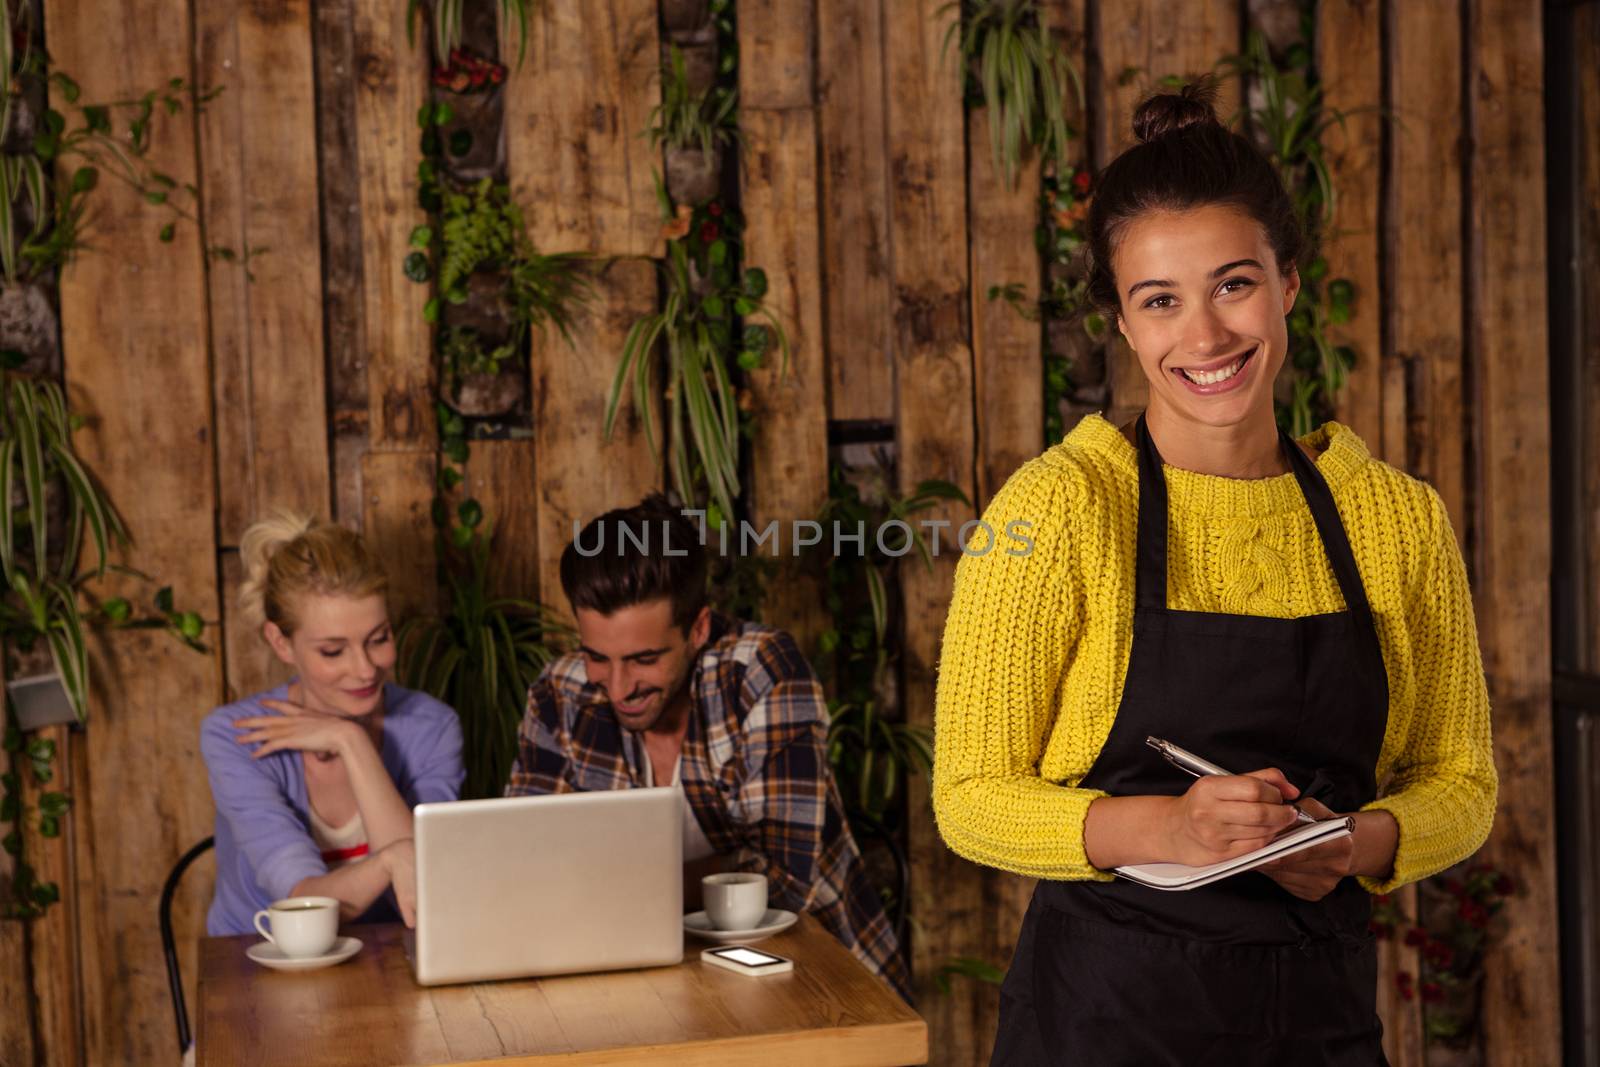 A waitress is taking the order in front of the two friends in a coffee shop